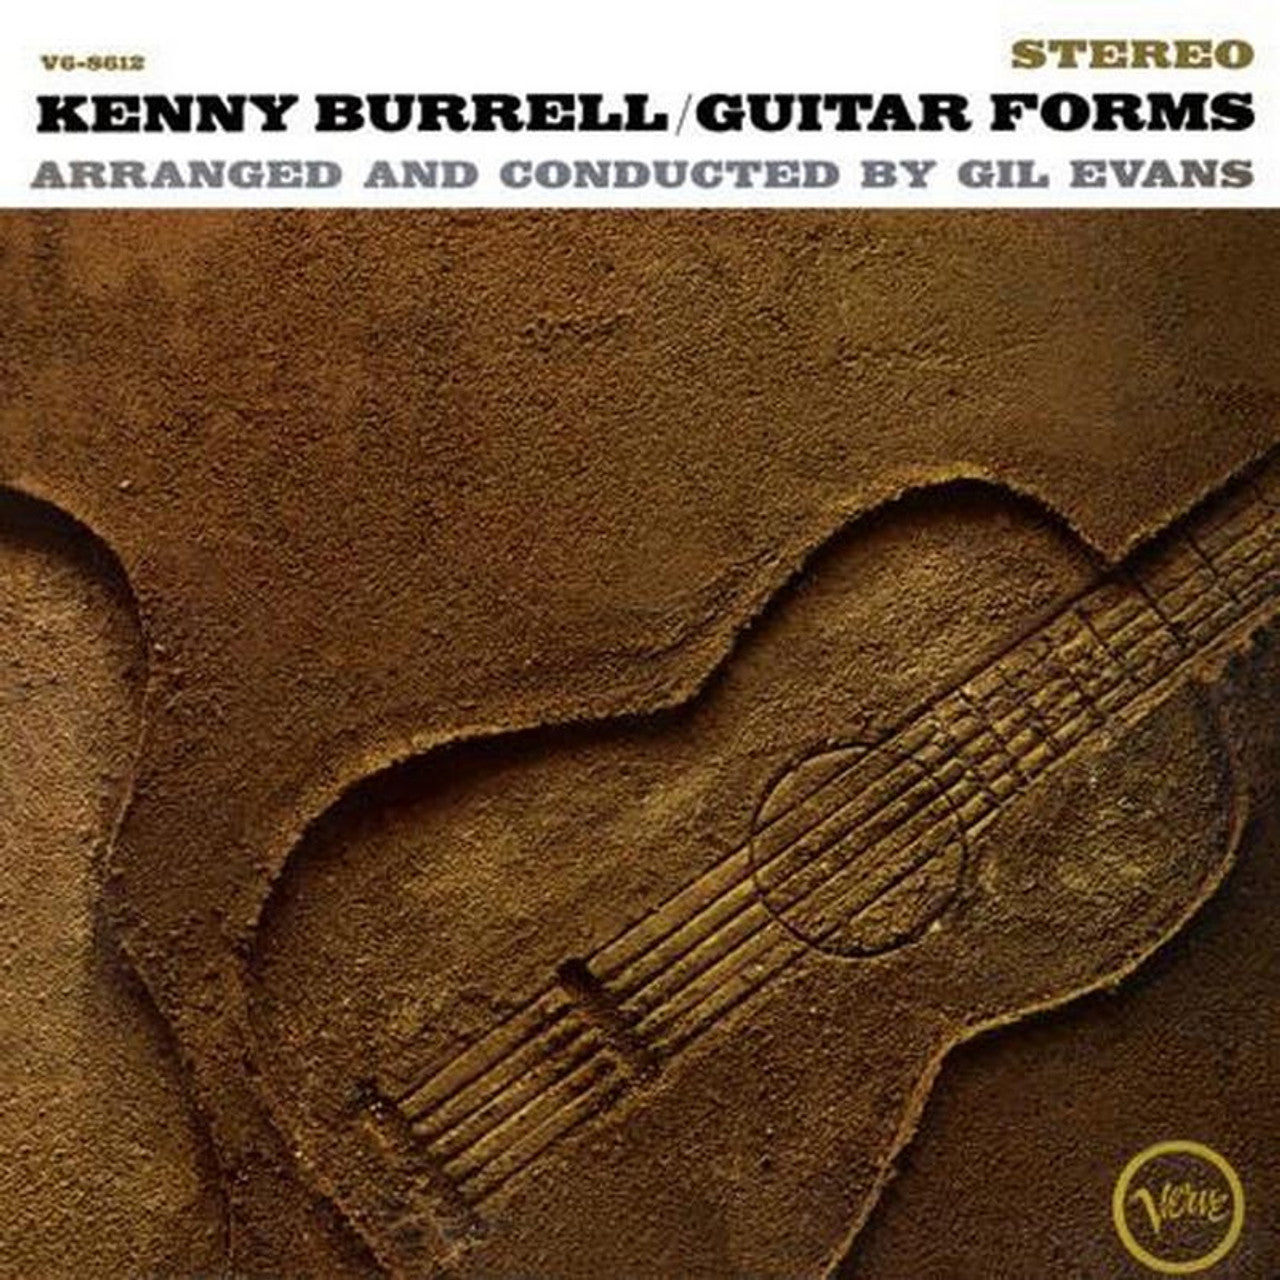 Kenny Burrell - Guitar Forms - Acoustic Sounds Series LP